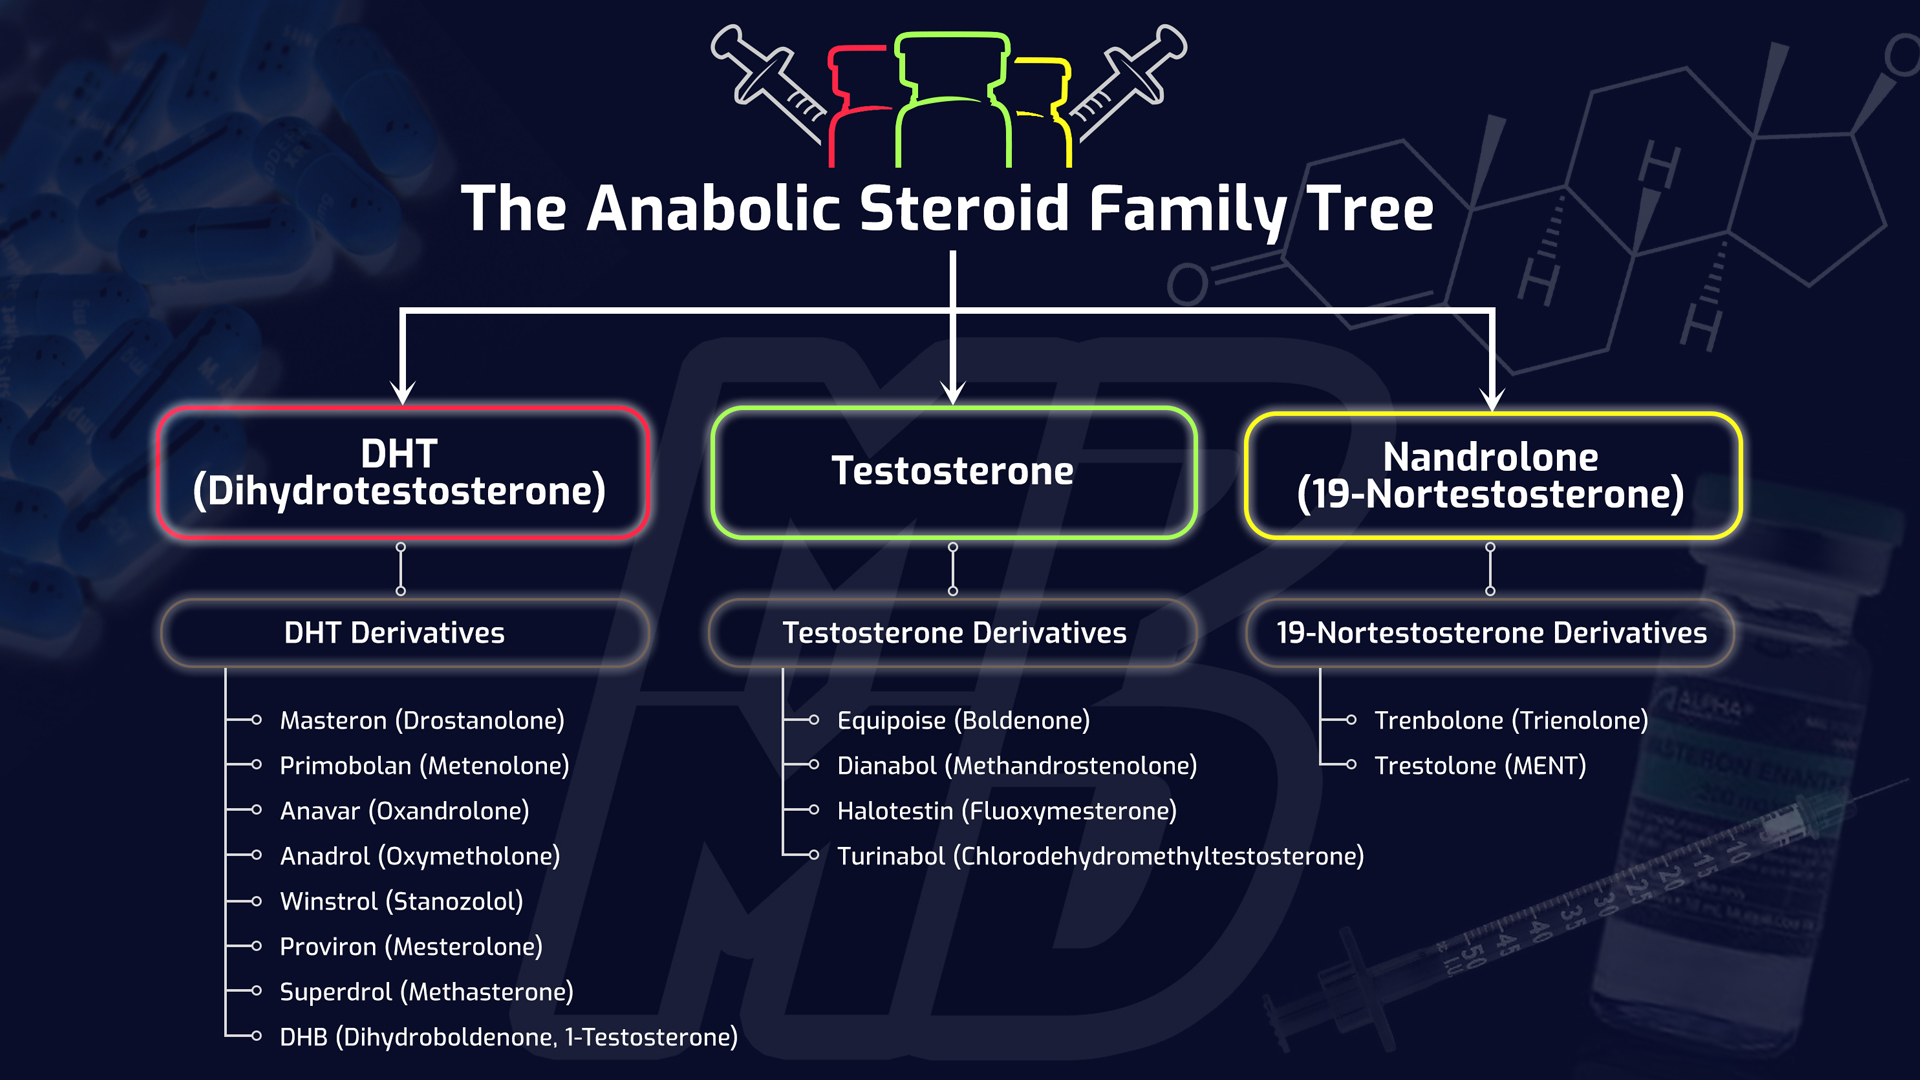 Types of anabolic steroids.jpg